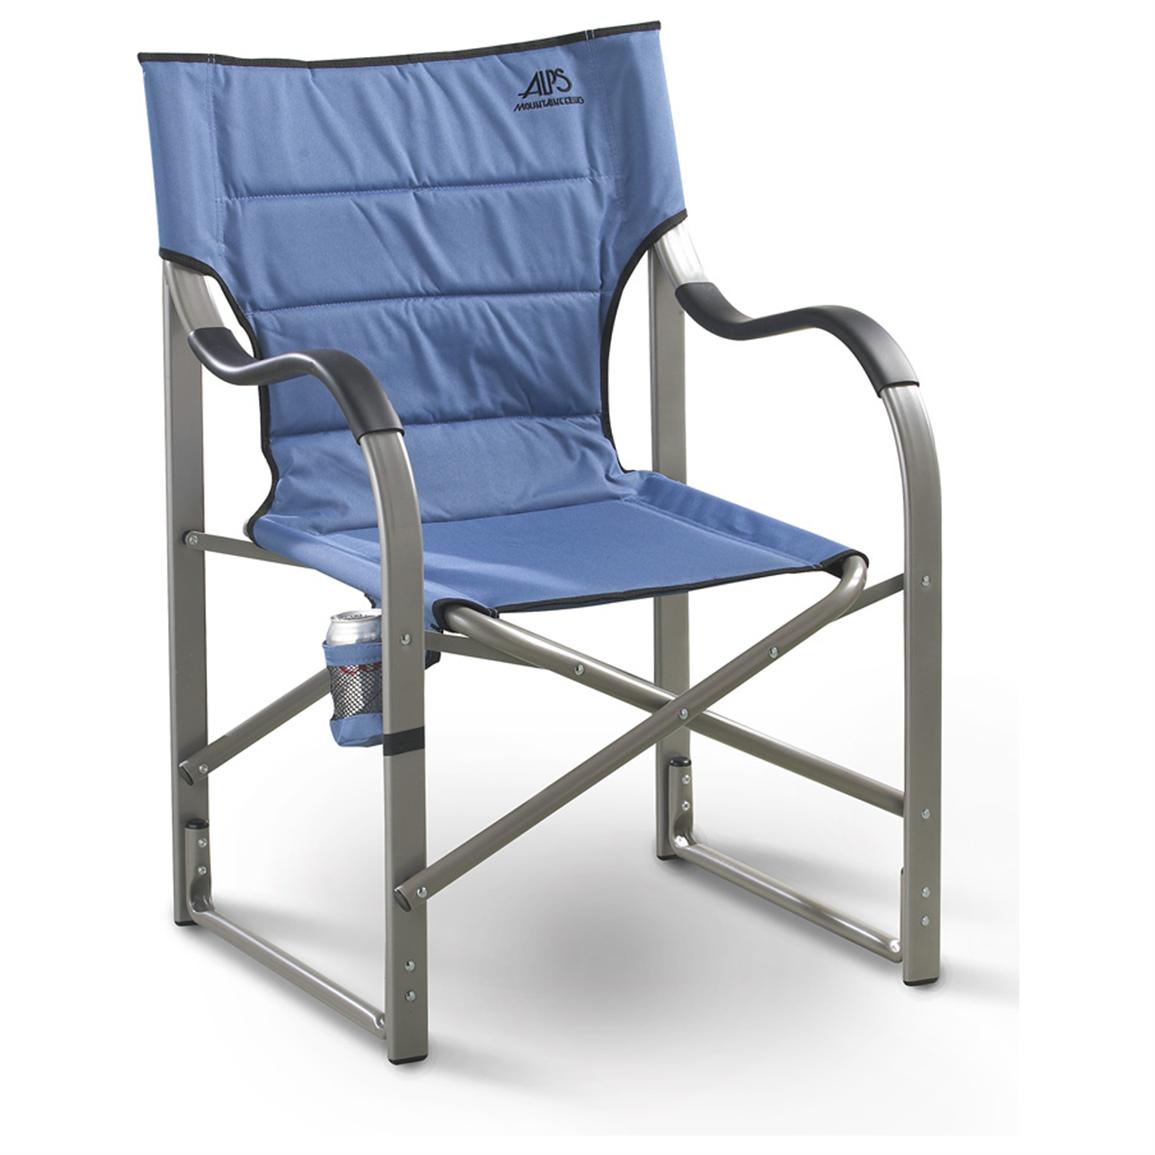 Alps Mountaineering Oversized Folding Camp Chair - 91846, Camping